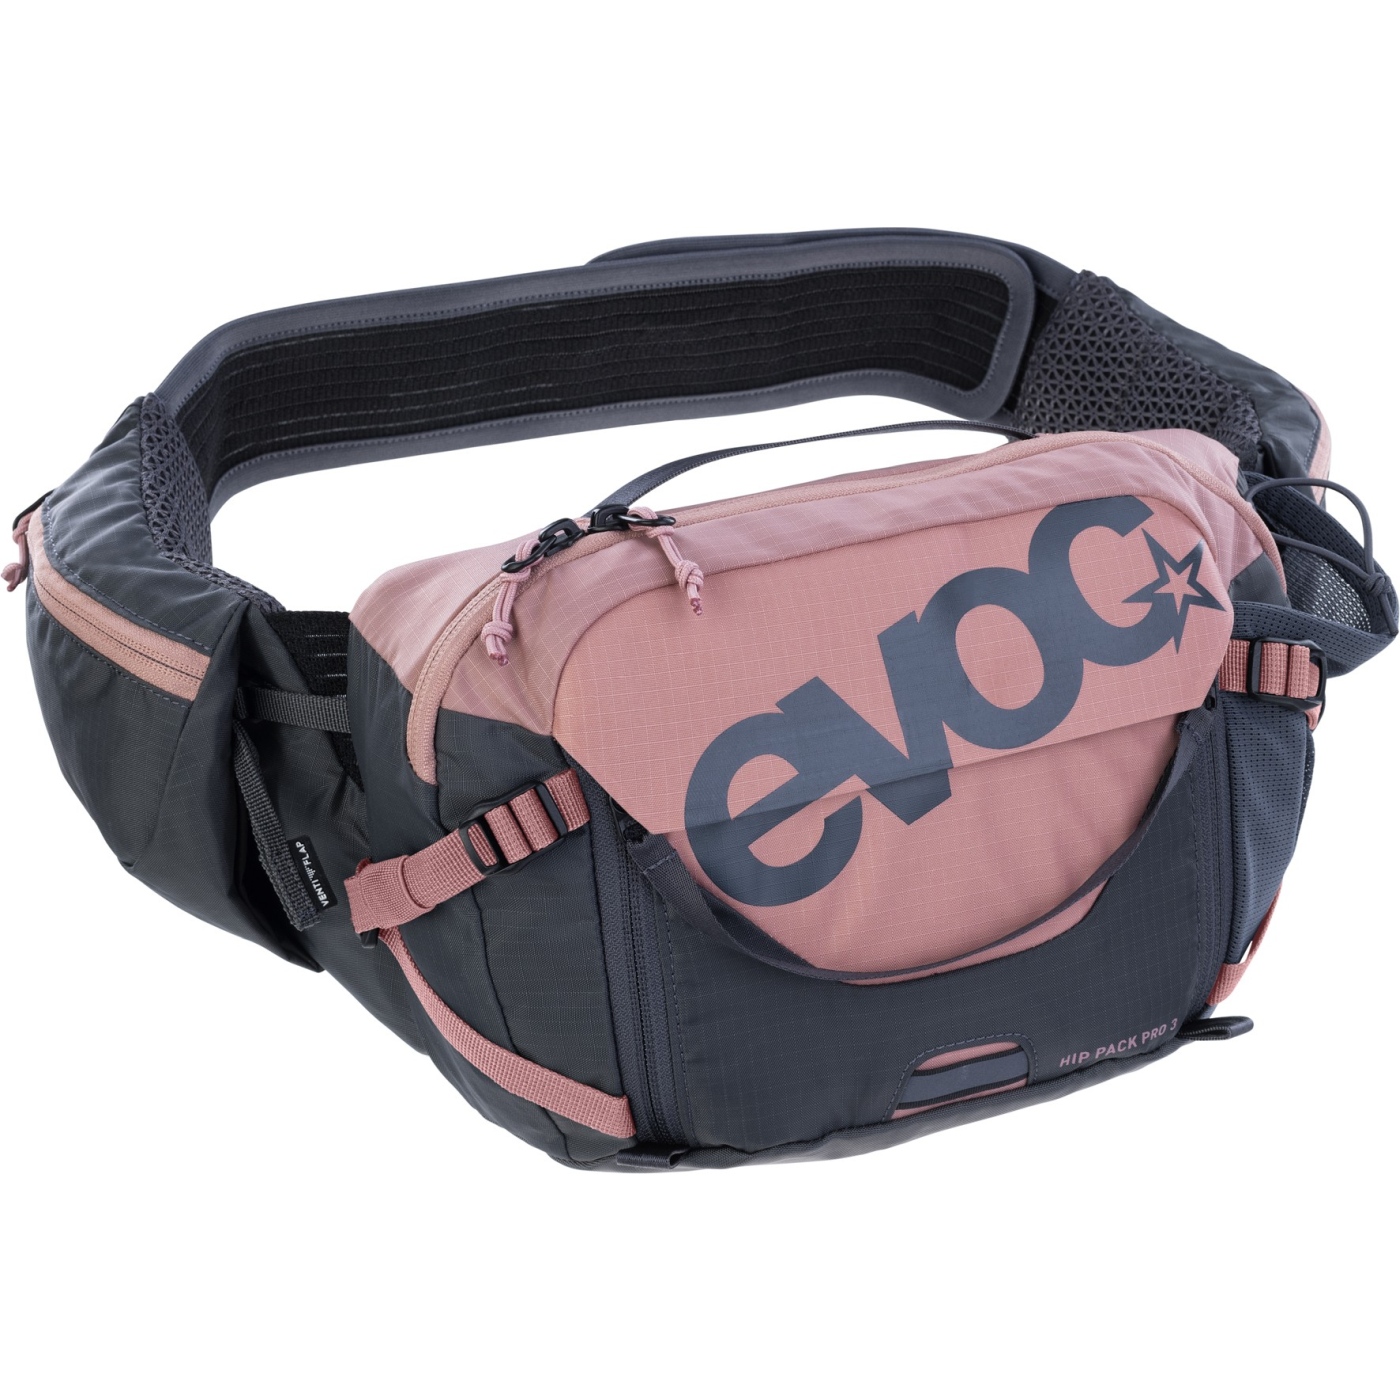 Picture of EVOC Hip Pack Pro 3 L + 1.5 L Hydration Bladder - Dusty Pink - Carbon Grey